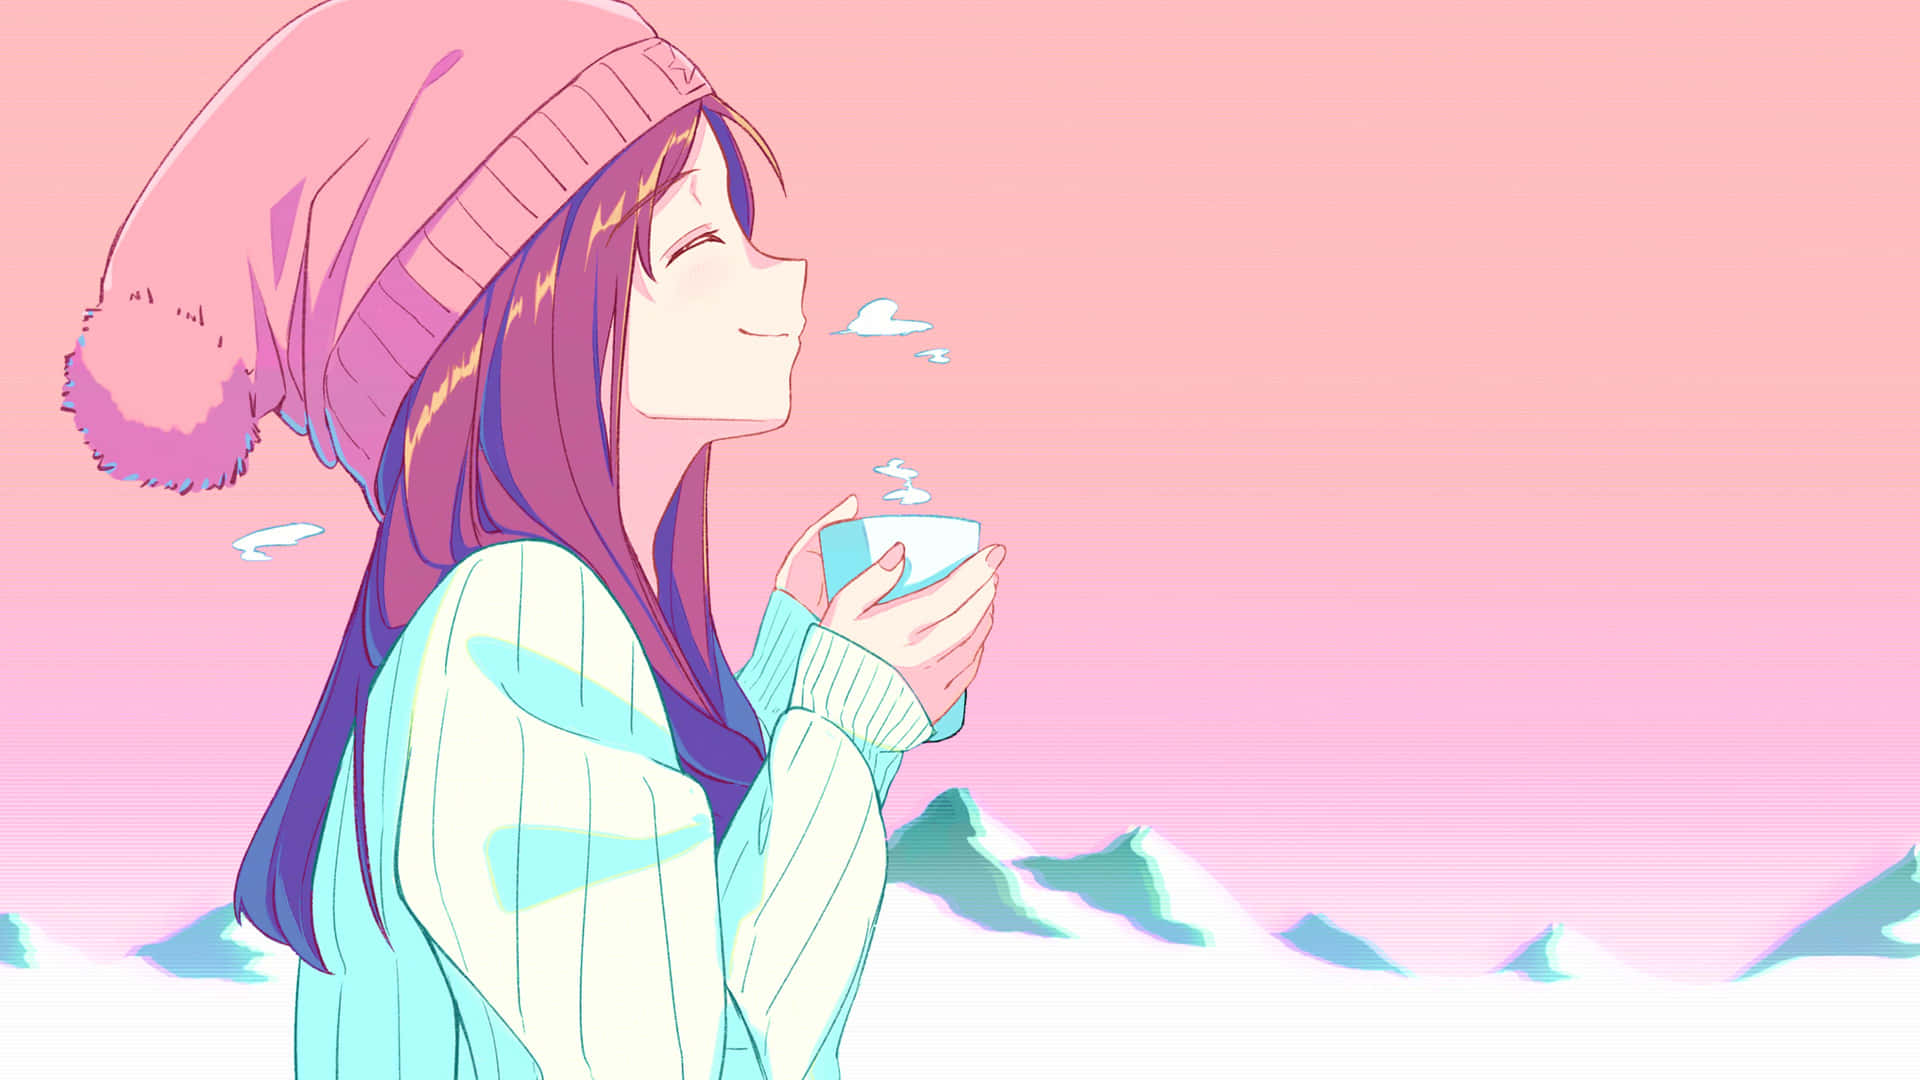 Backdrop of a Vibrant Pink Aesthetic in Anime